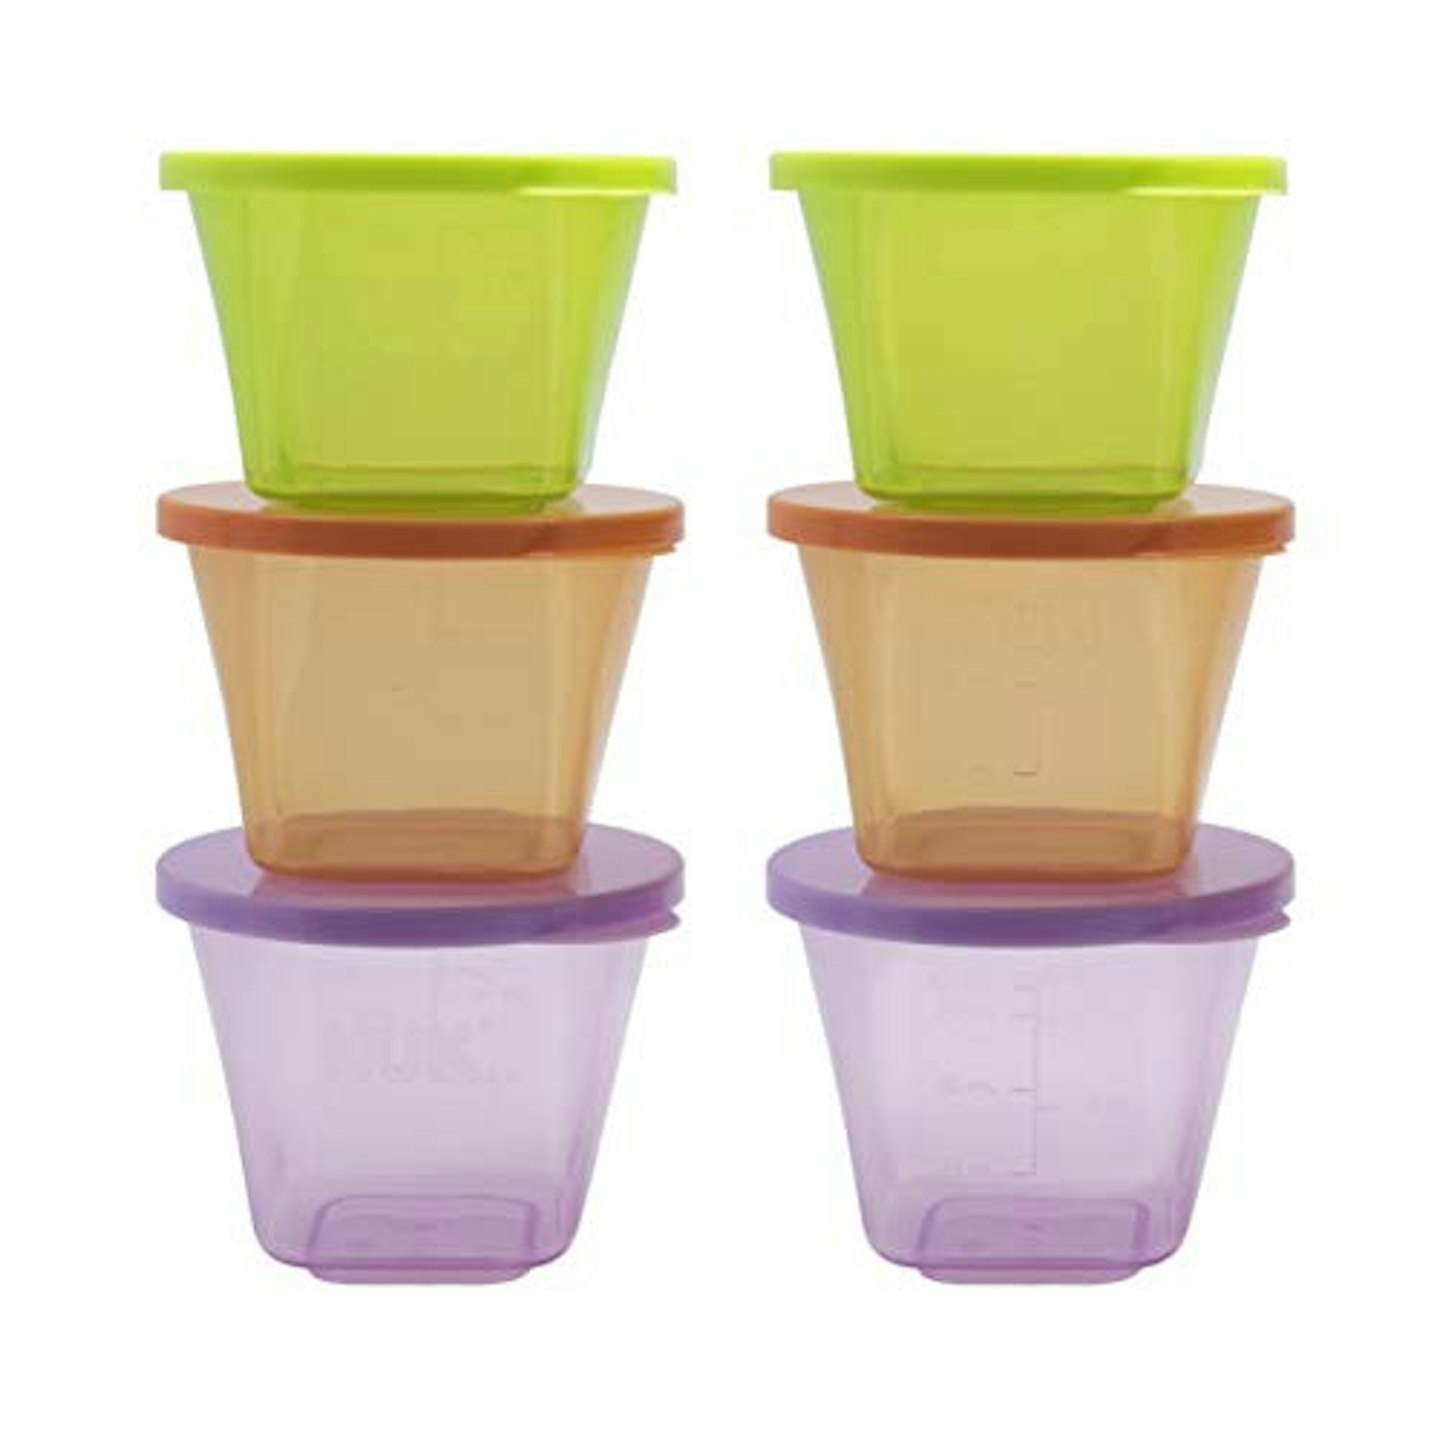 NUK Baby Stackable Food Storage Containers